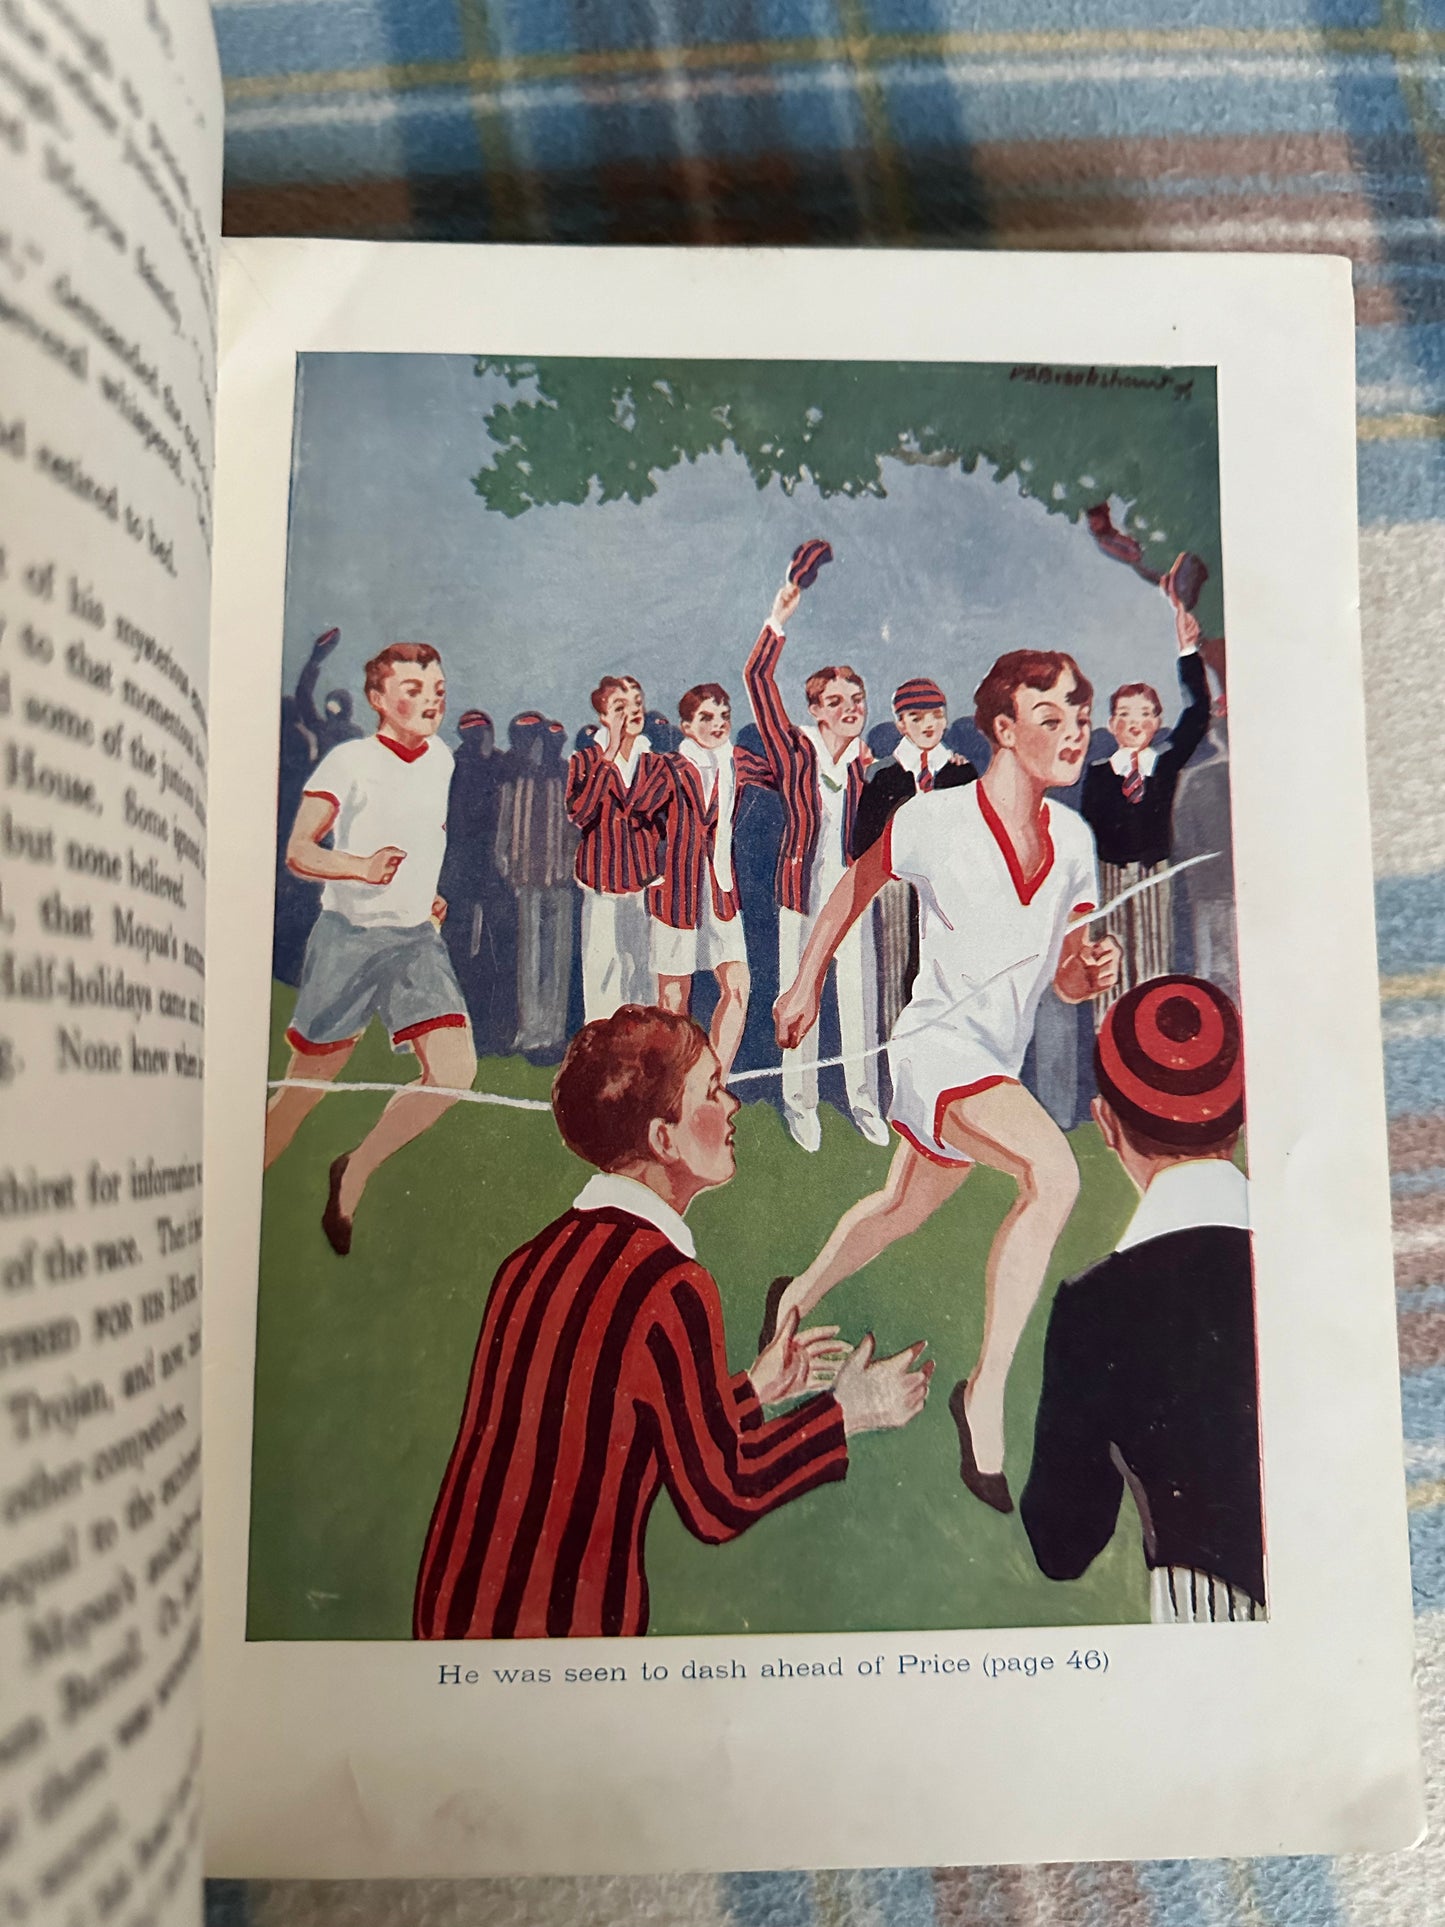 1920 The Jolly Book For Boys - Edwin Chisholm(Thomas Nelson & Sons Ltd)